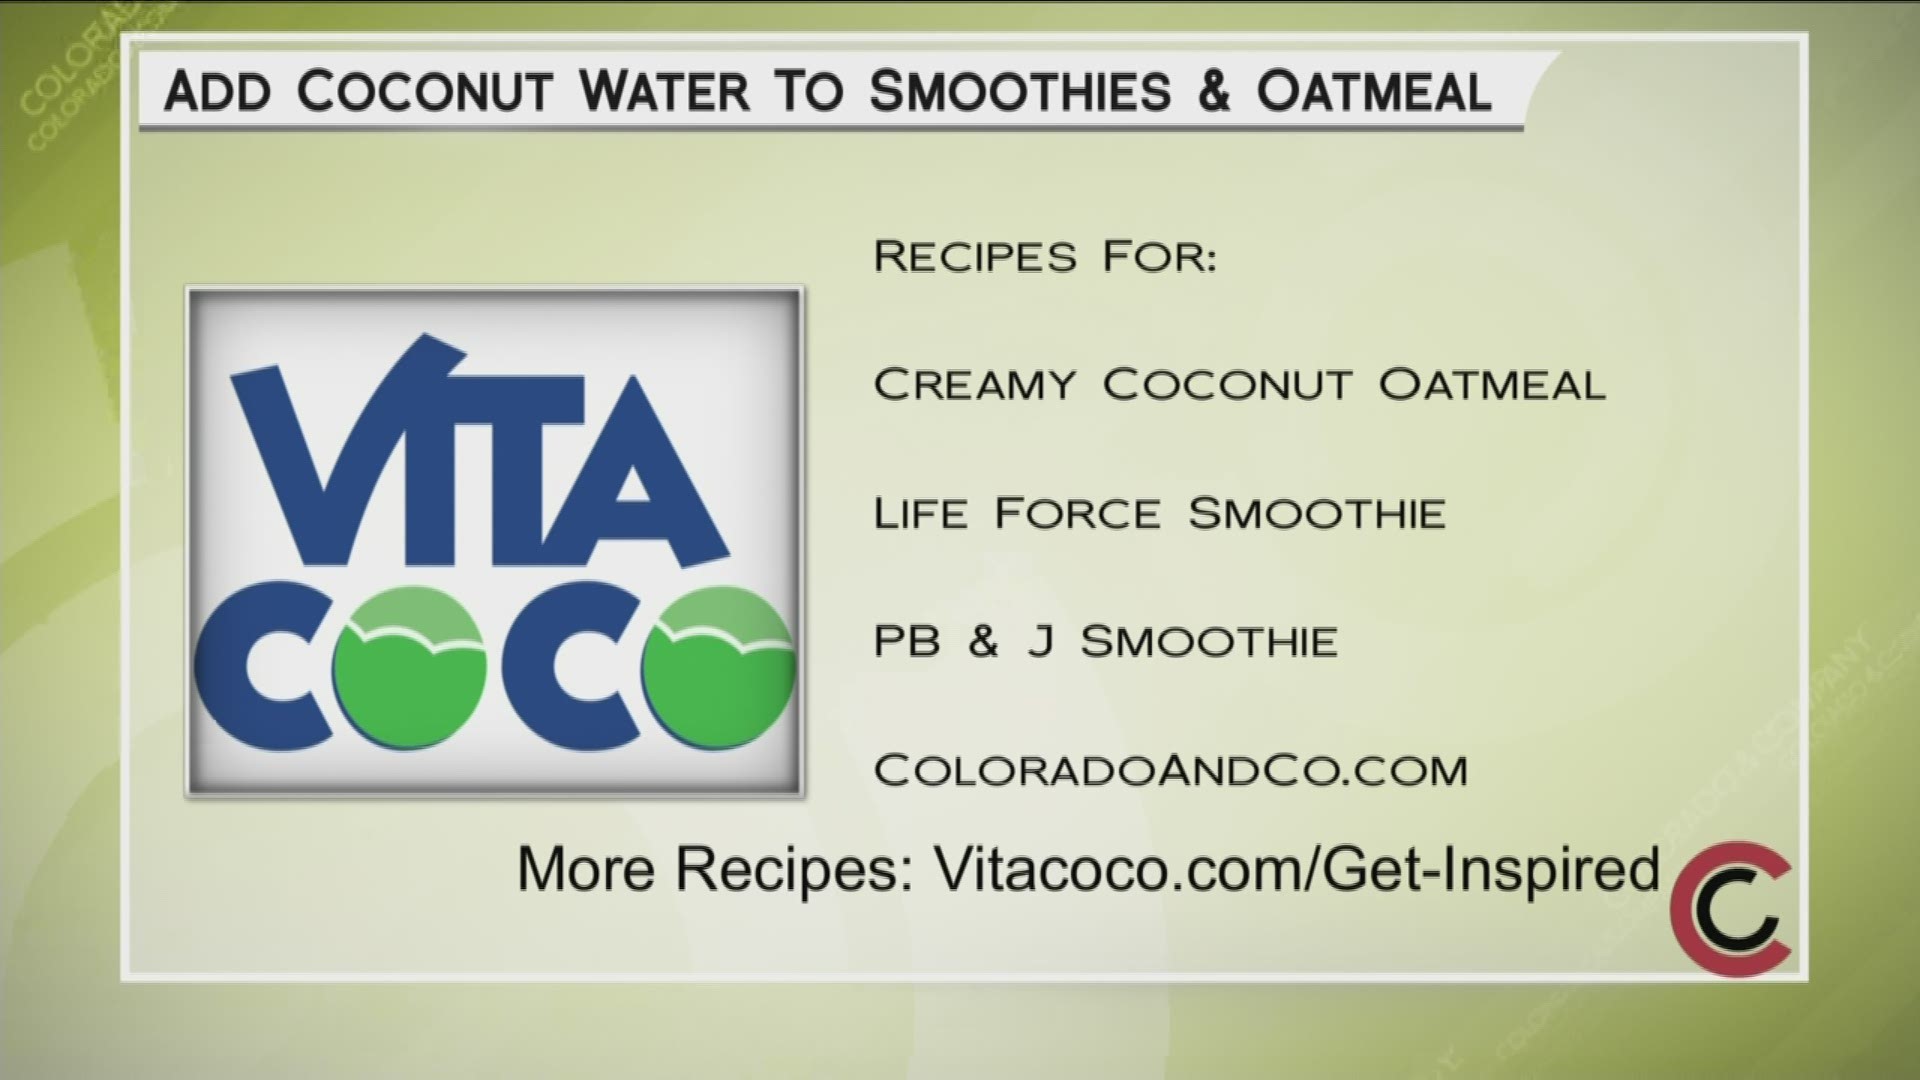 Find Vita Coco Coconut Water and other great products at your neighborhood King Soopers, your home for OptimumWellness. Learn more at Vitacoco.com.